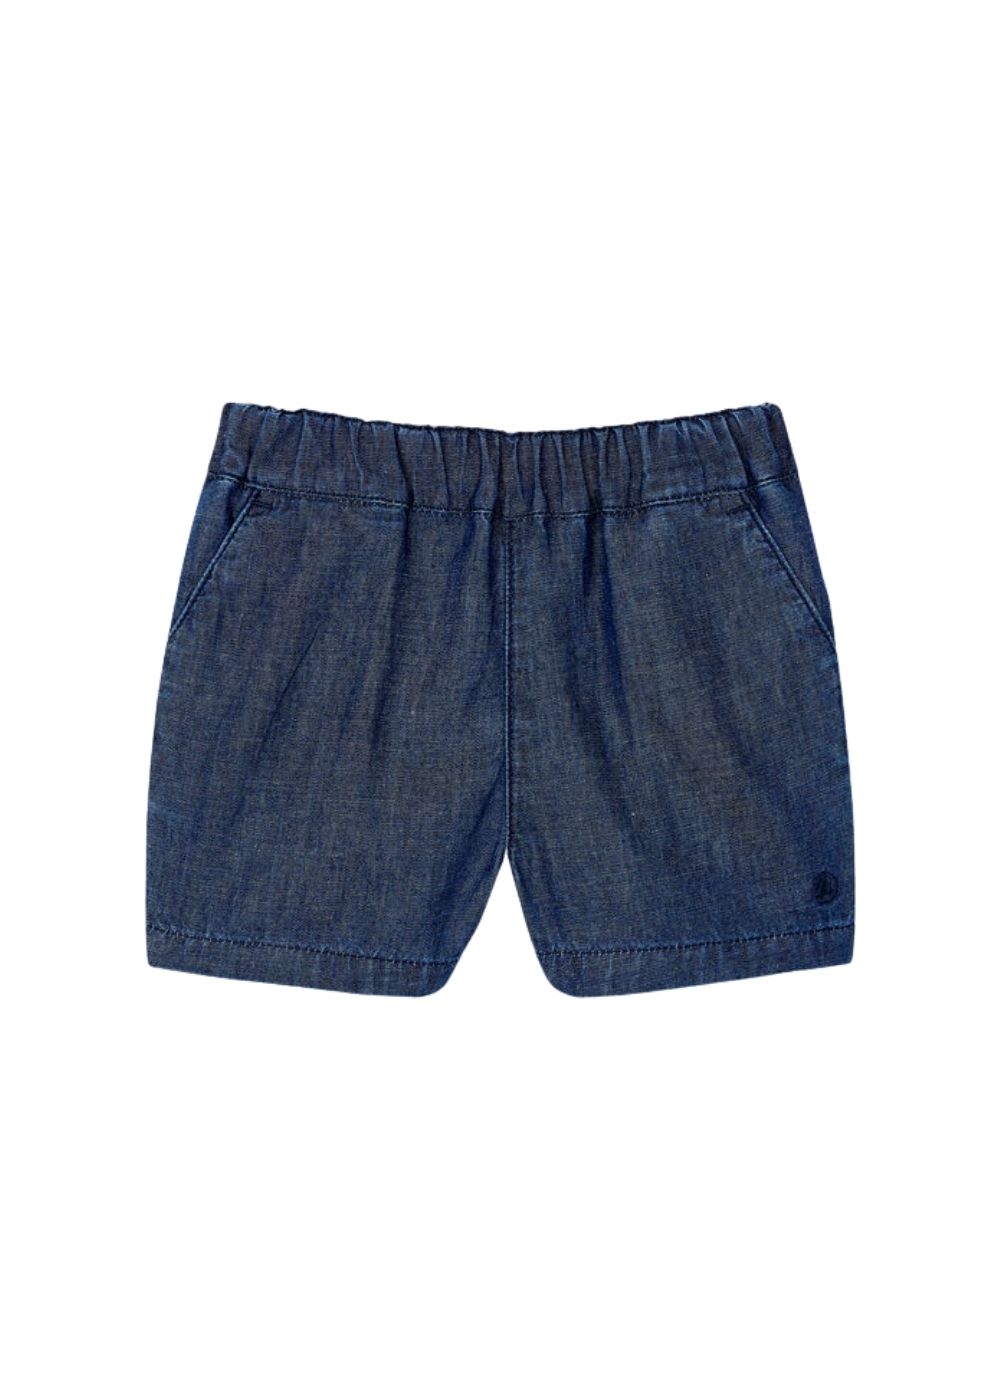 Featured image for “Petit Bateau Shorts in denim”